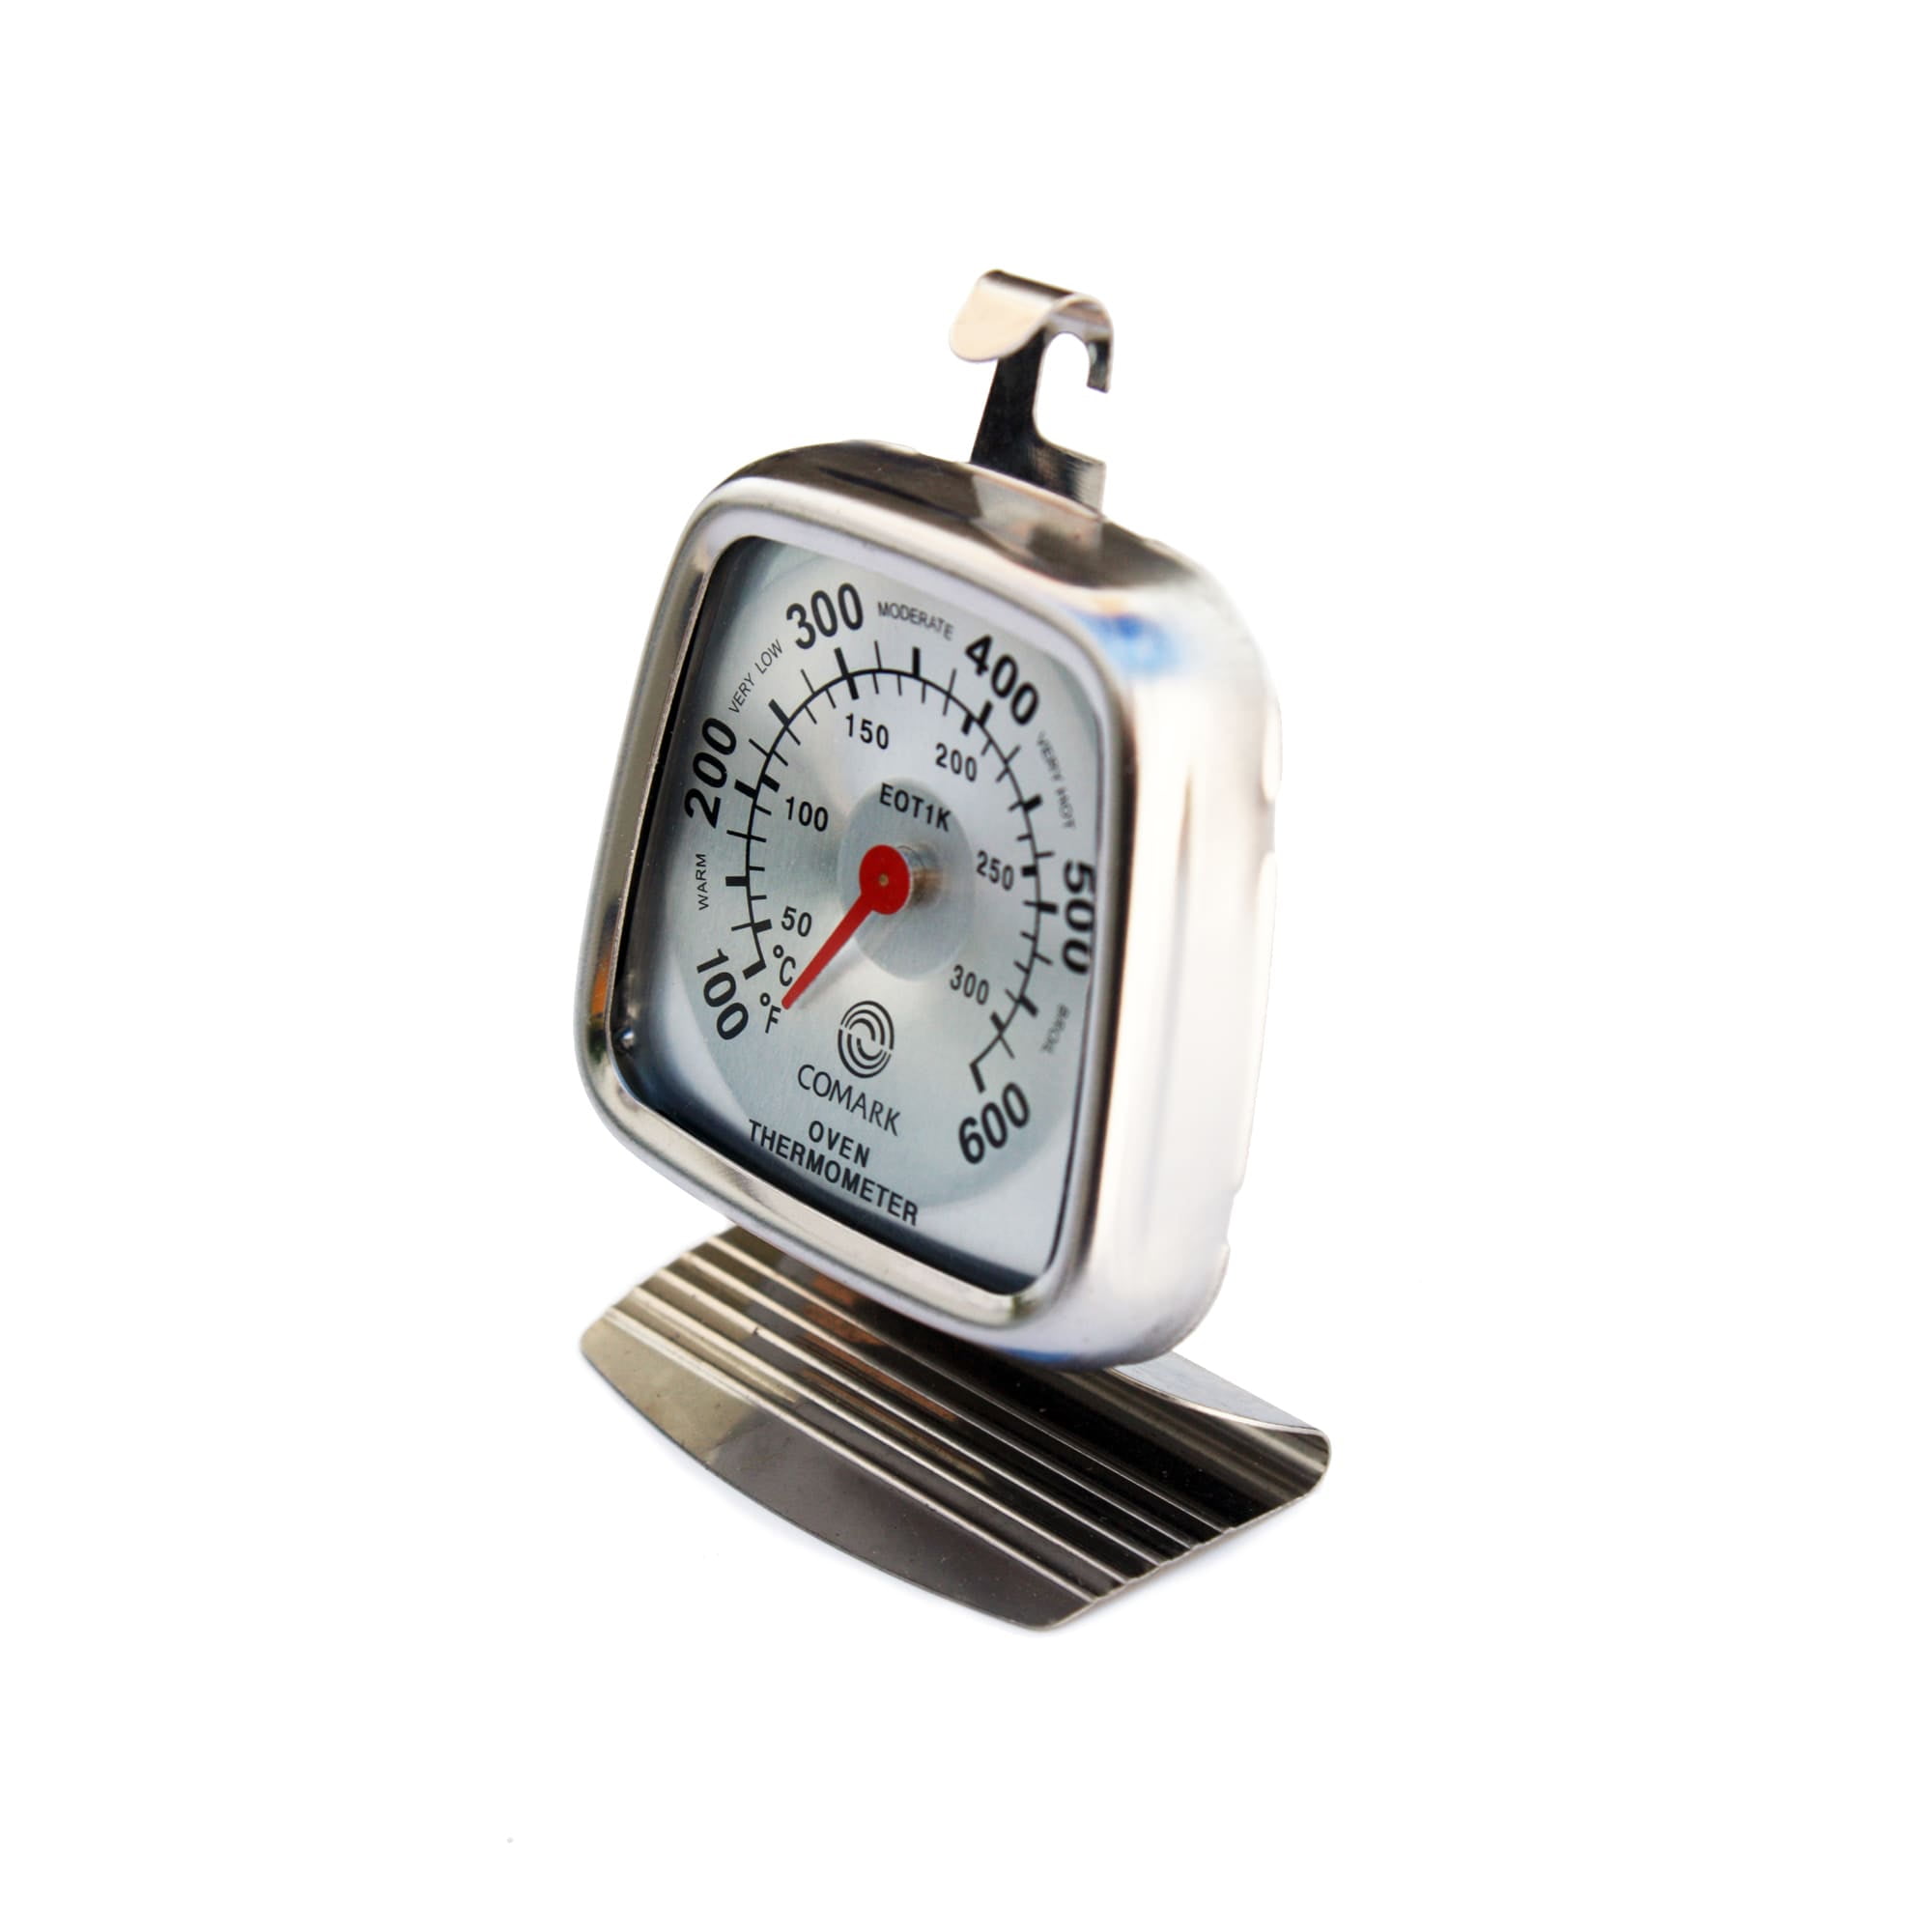 Comark DOT2AK | Oven Dial Thermometer